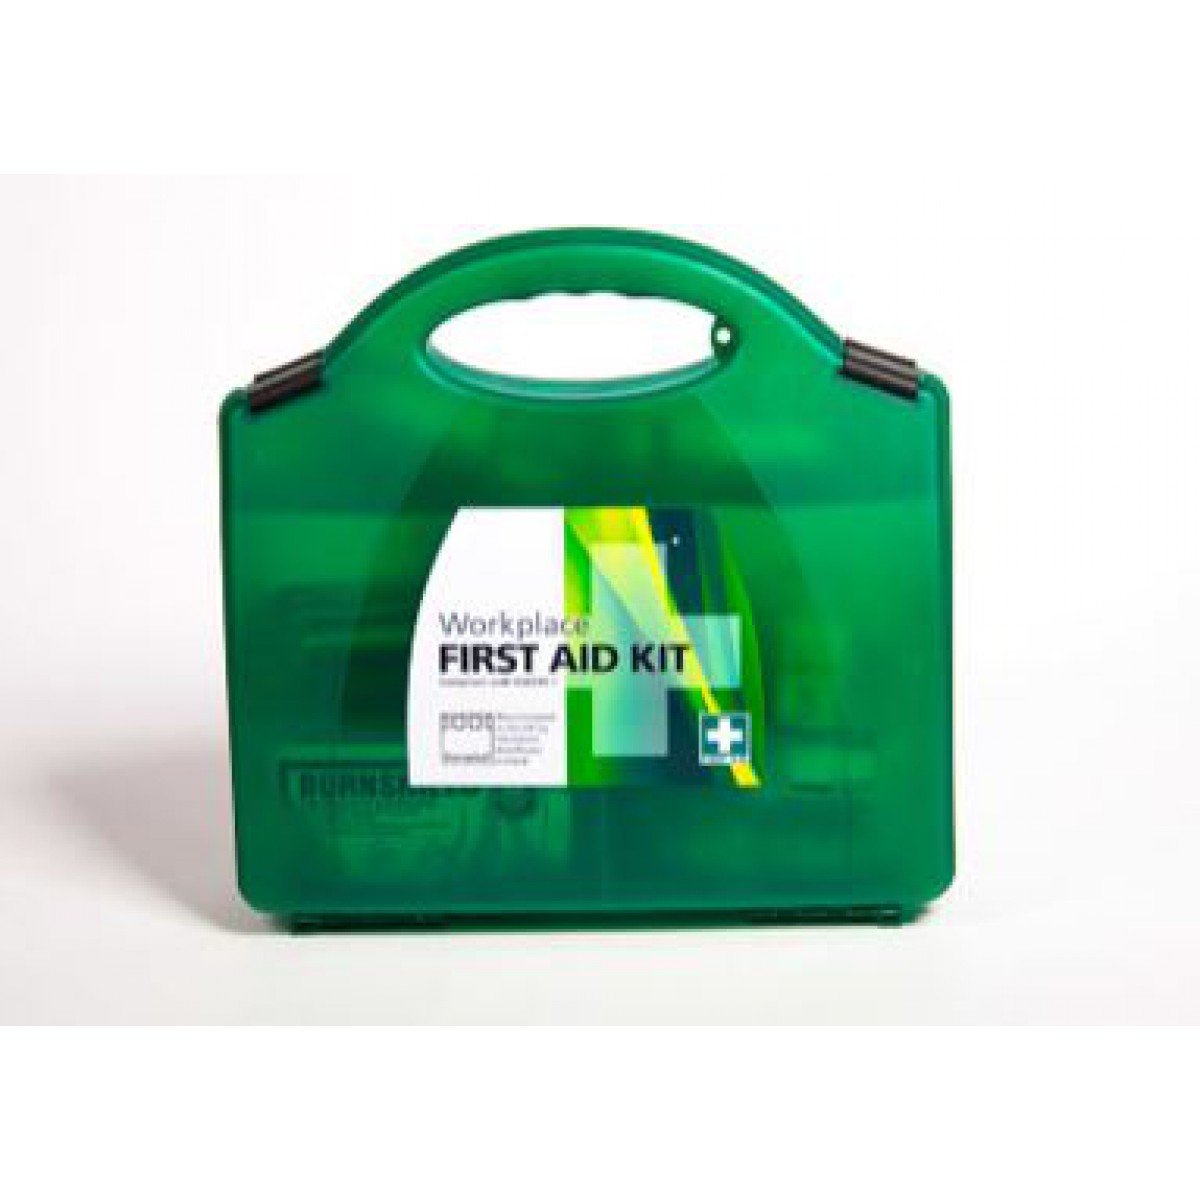 Refill for Workplace First Aid Kit BS-8599